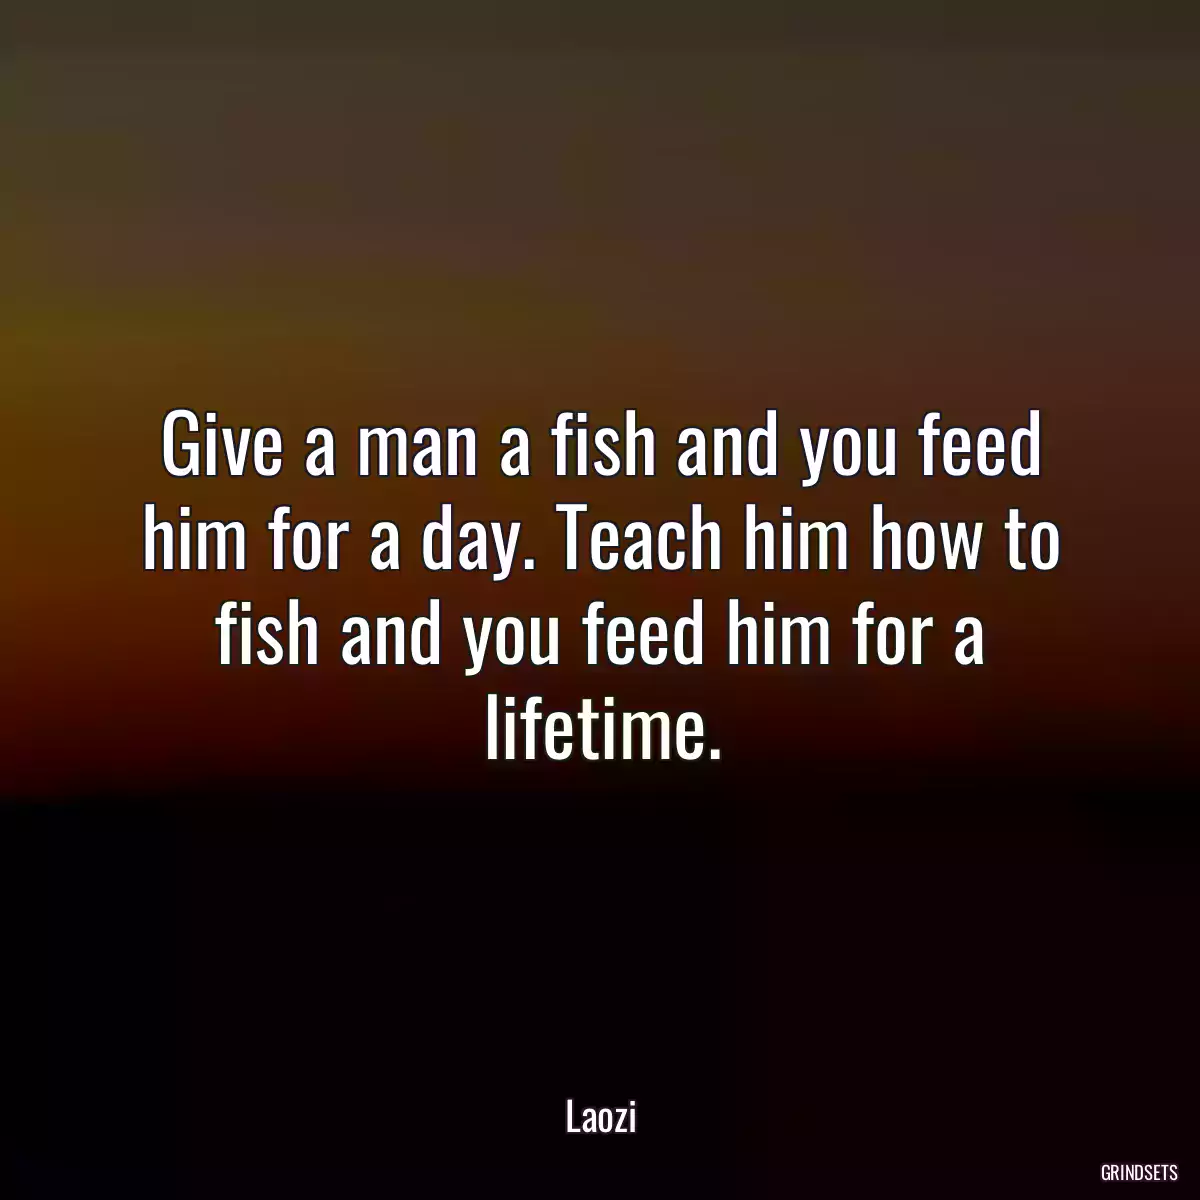 Give a man a fish and you feed him for a day. Teach him how to fish and you feed him for a lifetime.